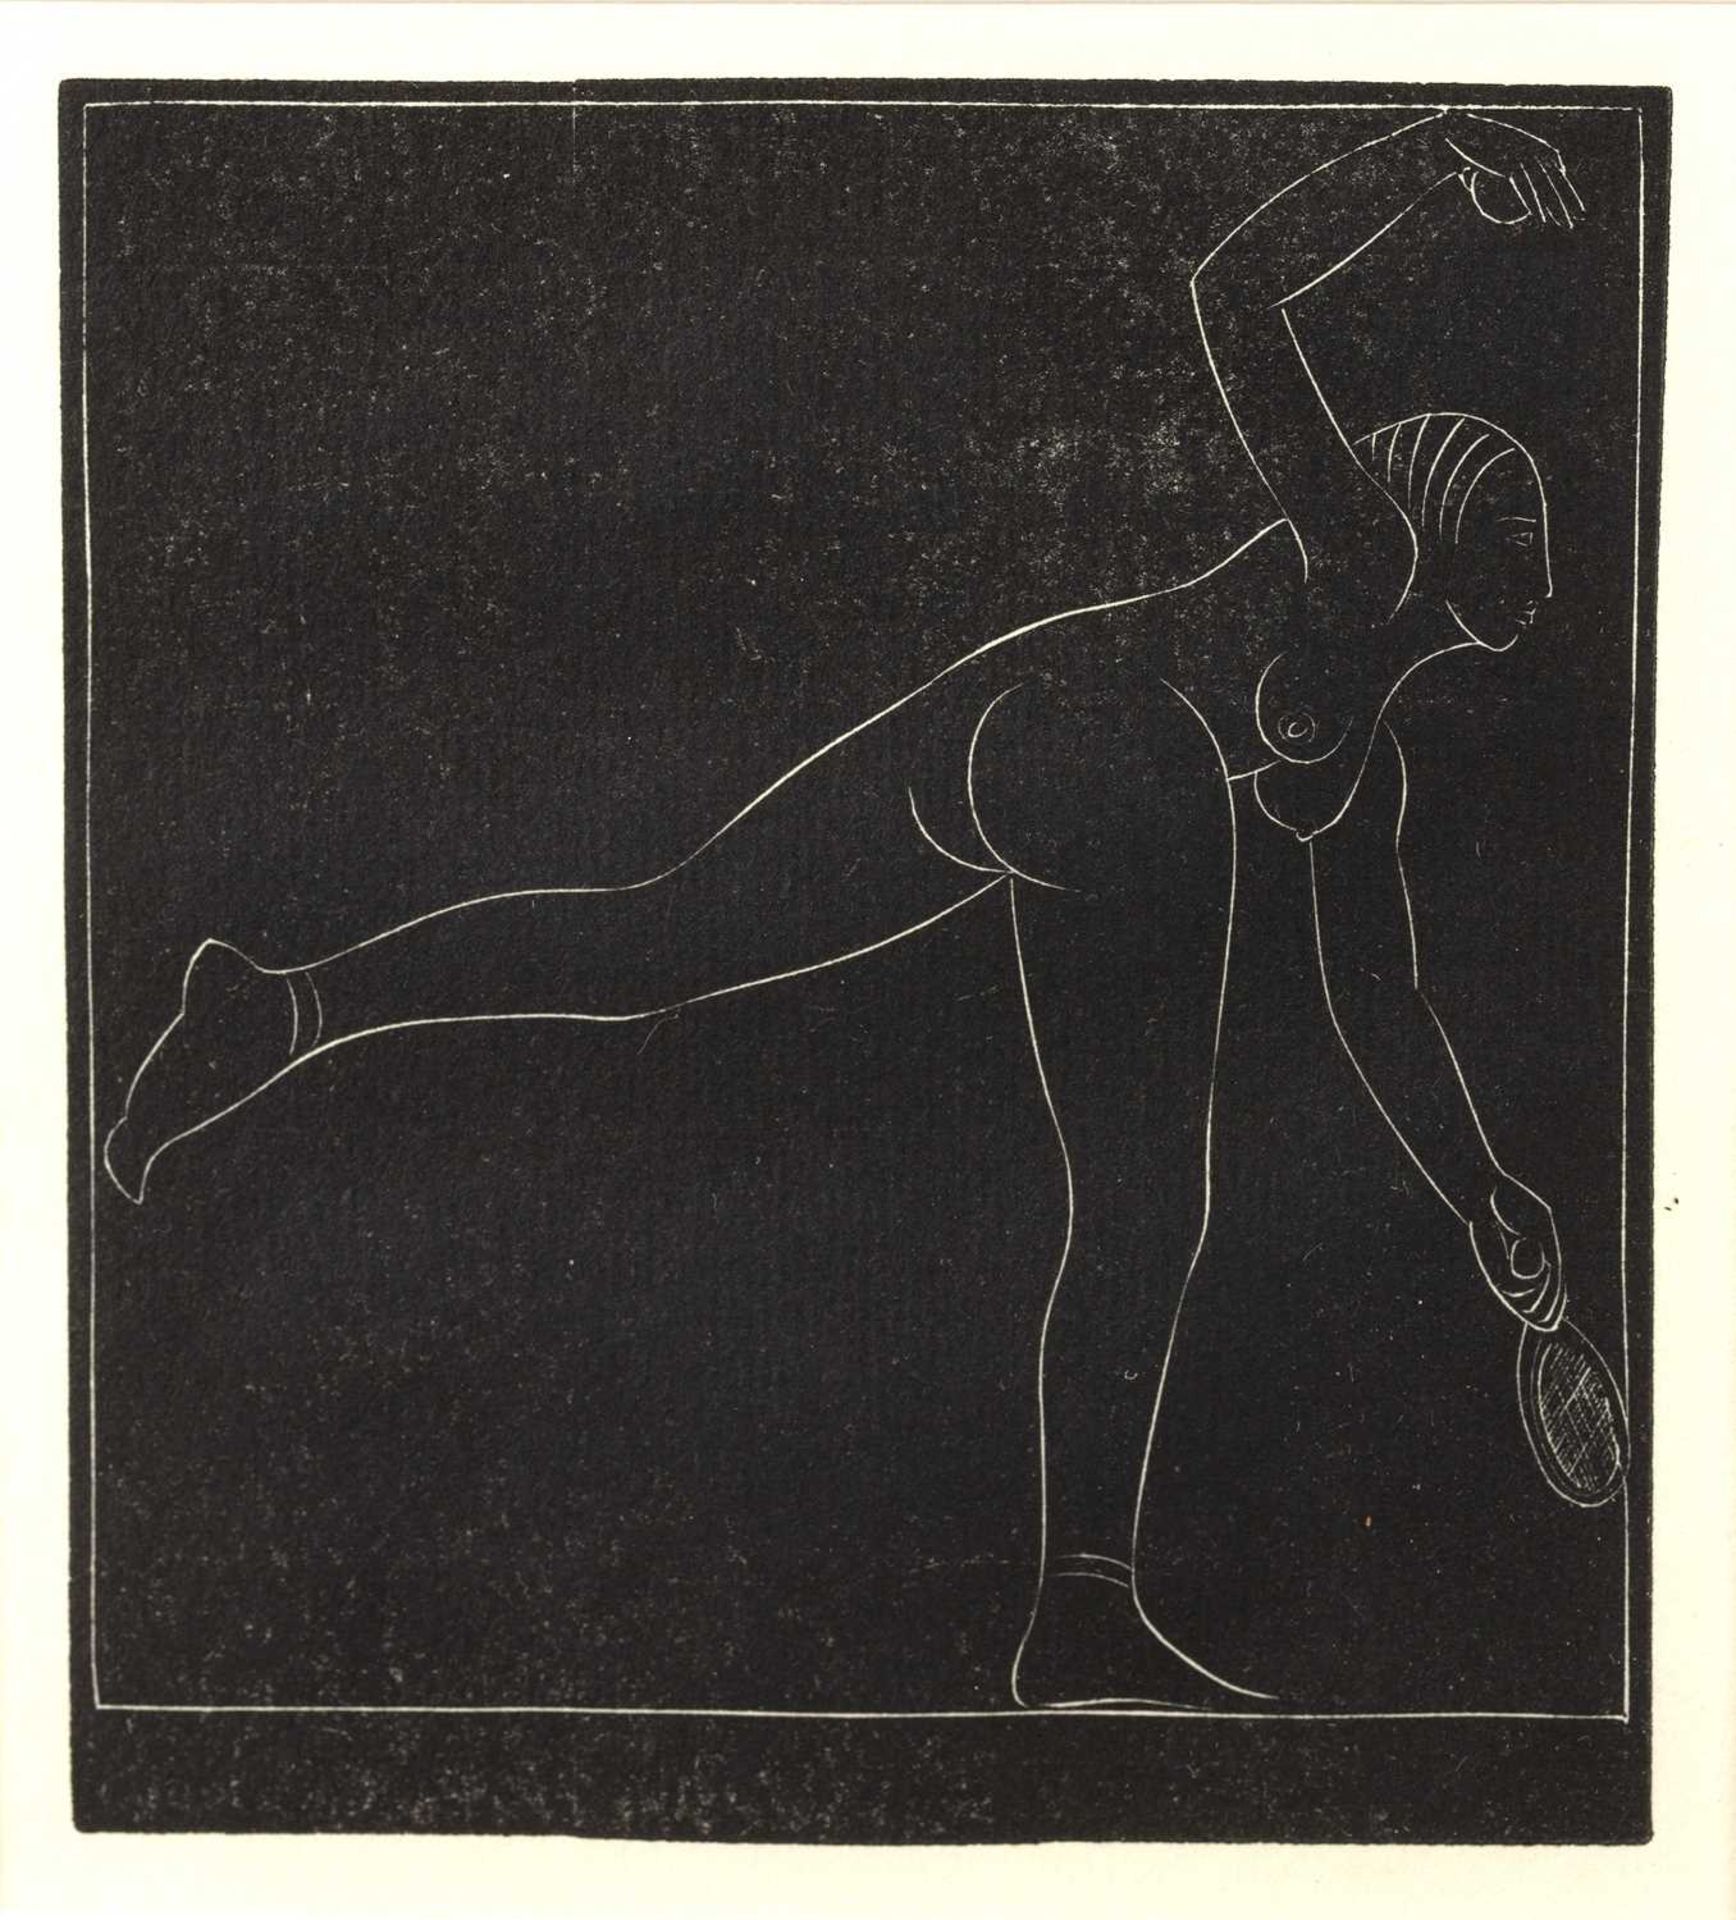 Eric Gill (1882-1940) The Tennis Player, 1924 wood engraving 11.5 x 10cm.